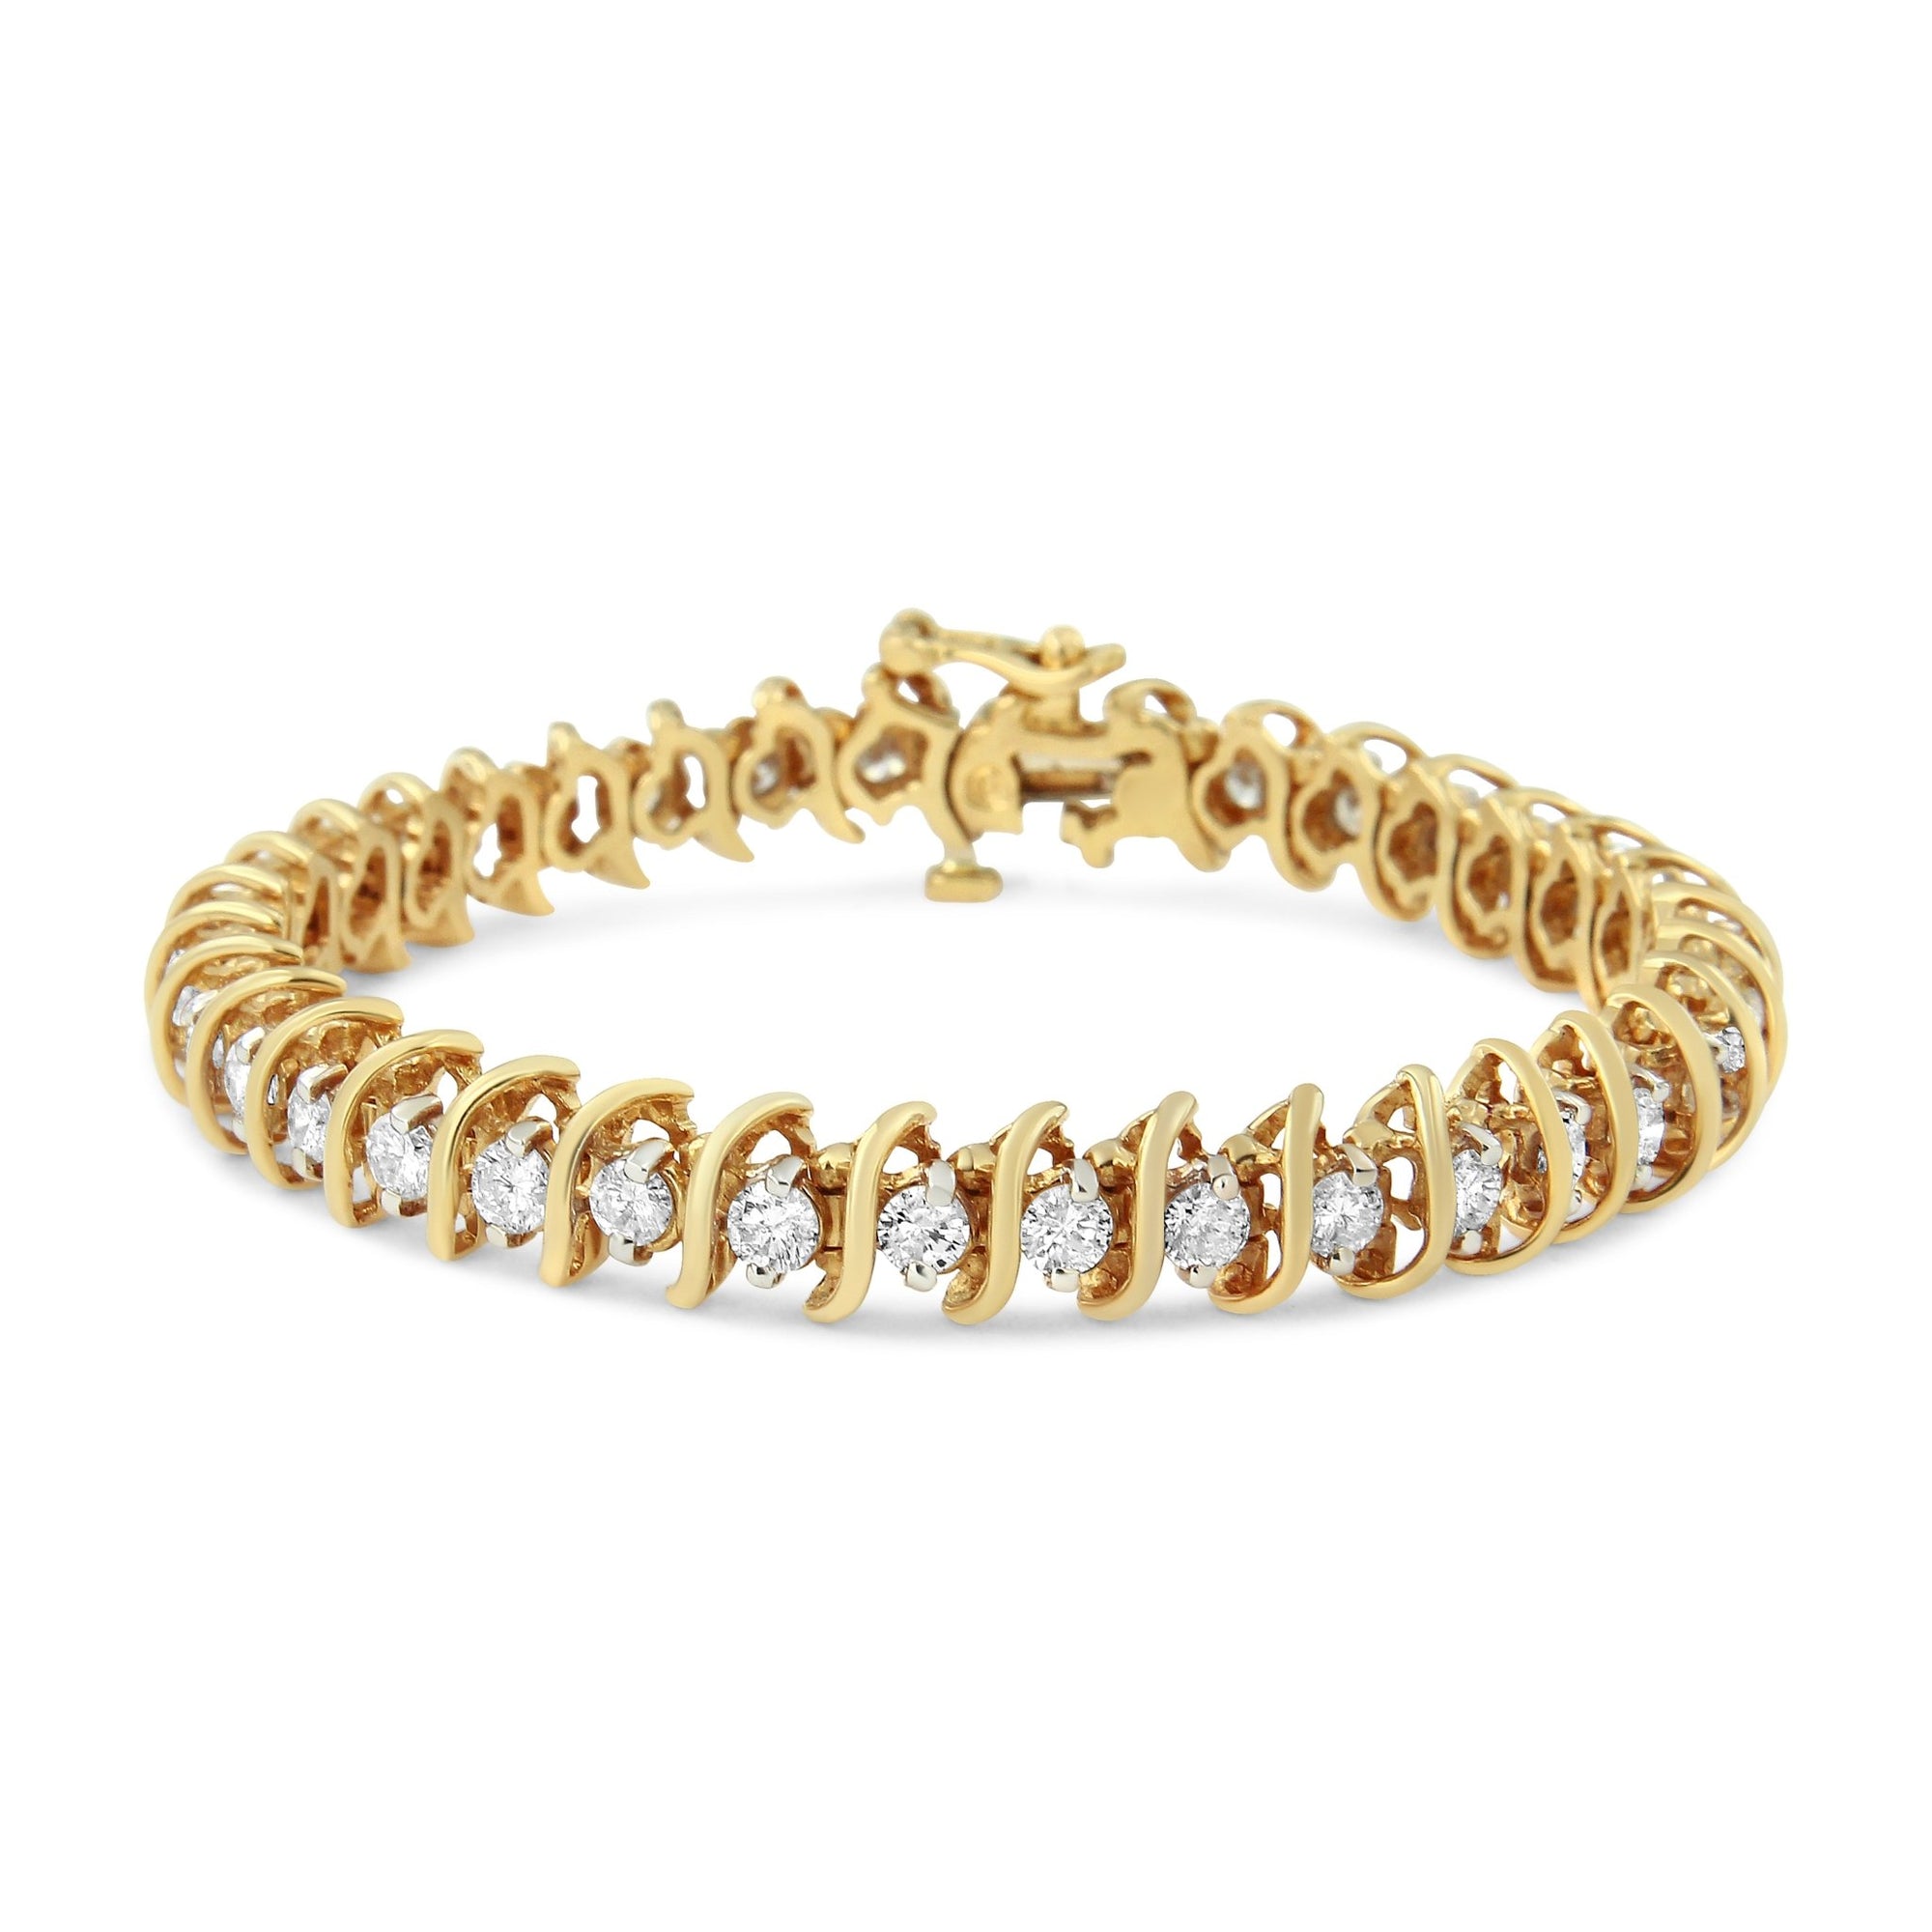 AGS Certified 18K Yellow Gold 5.00 Cttw "S" Link Wrapped 2-Prong Set Round Brilliant Diamond Tennis Bracelet (G-H Color, I1-I2 Clarity) - Size 7 - LinkagejewelrydesignLinkagejewelrydesign